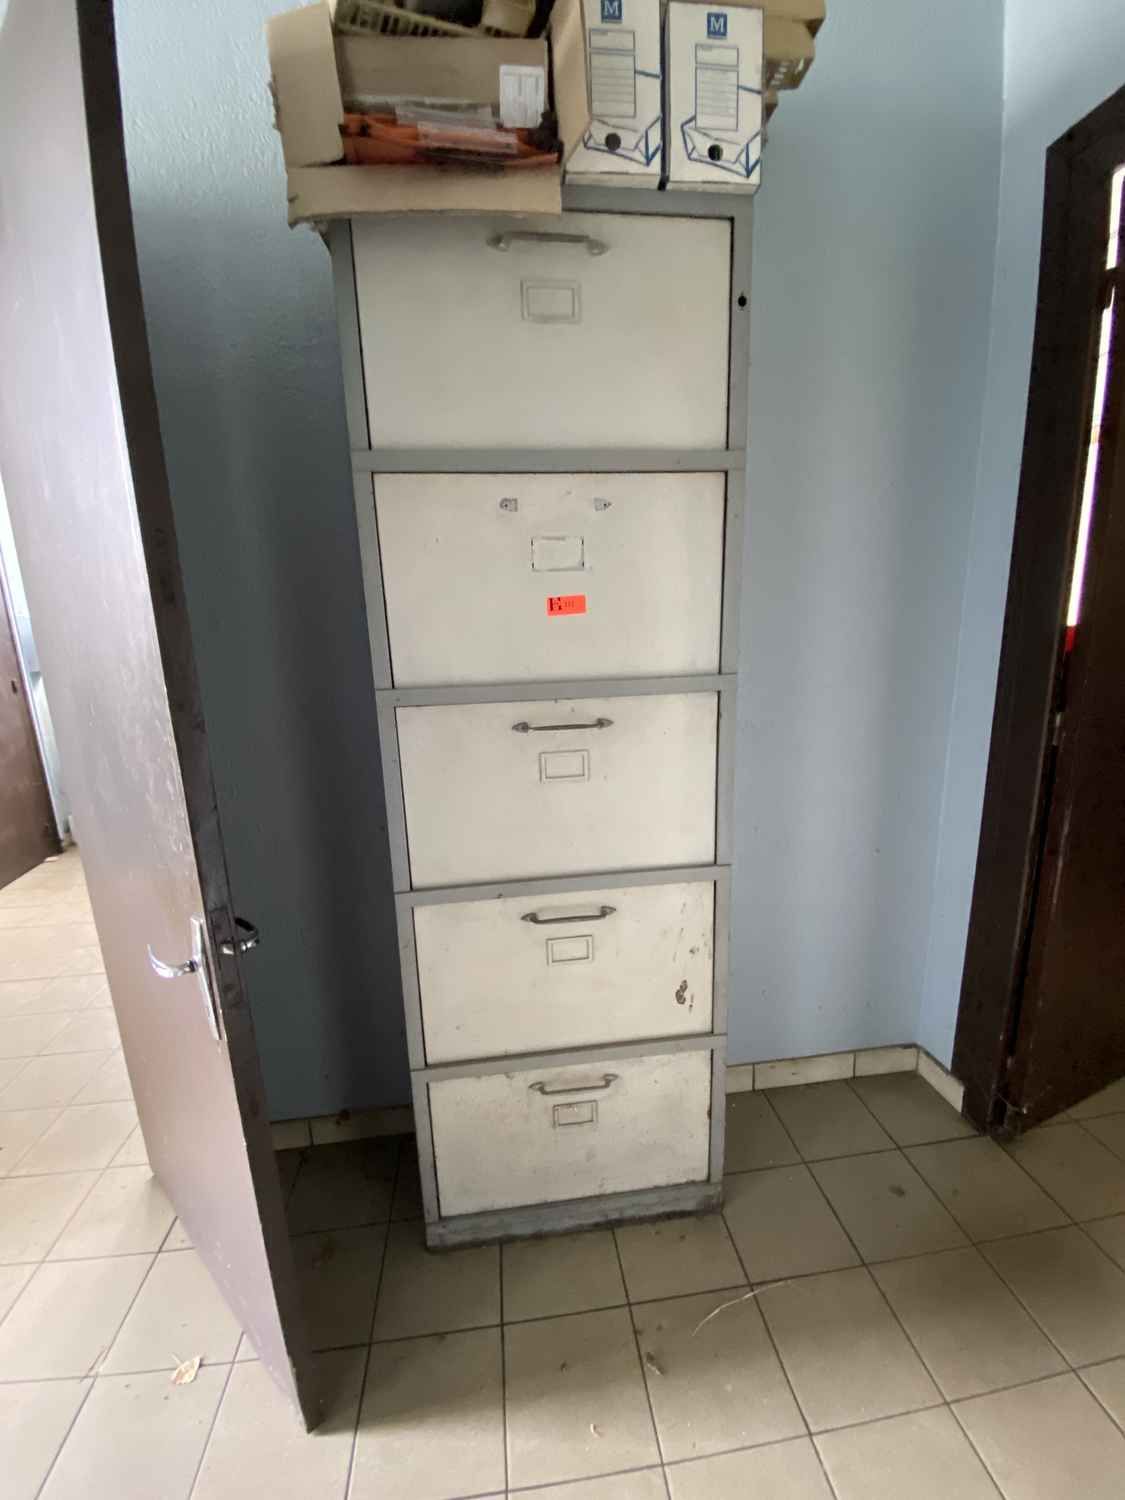 Null 1 Metal file cabinet Dim. 198 x 66 x 33 - As is